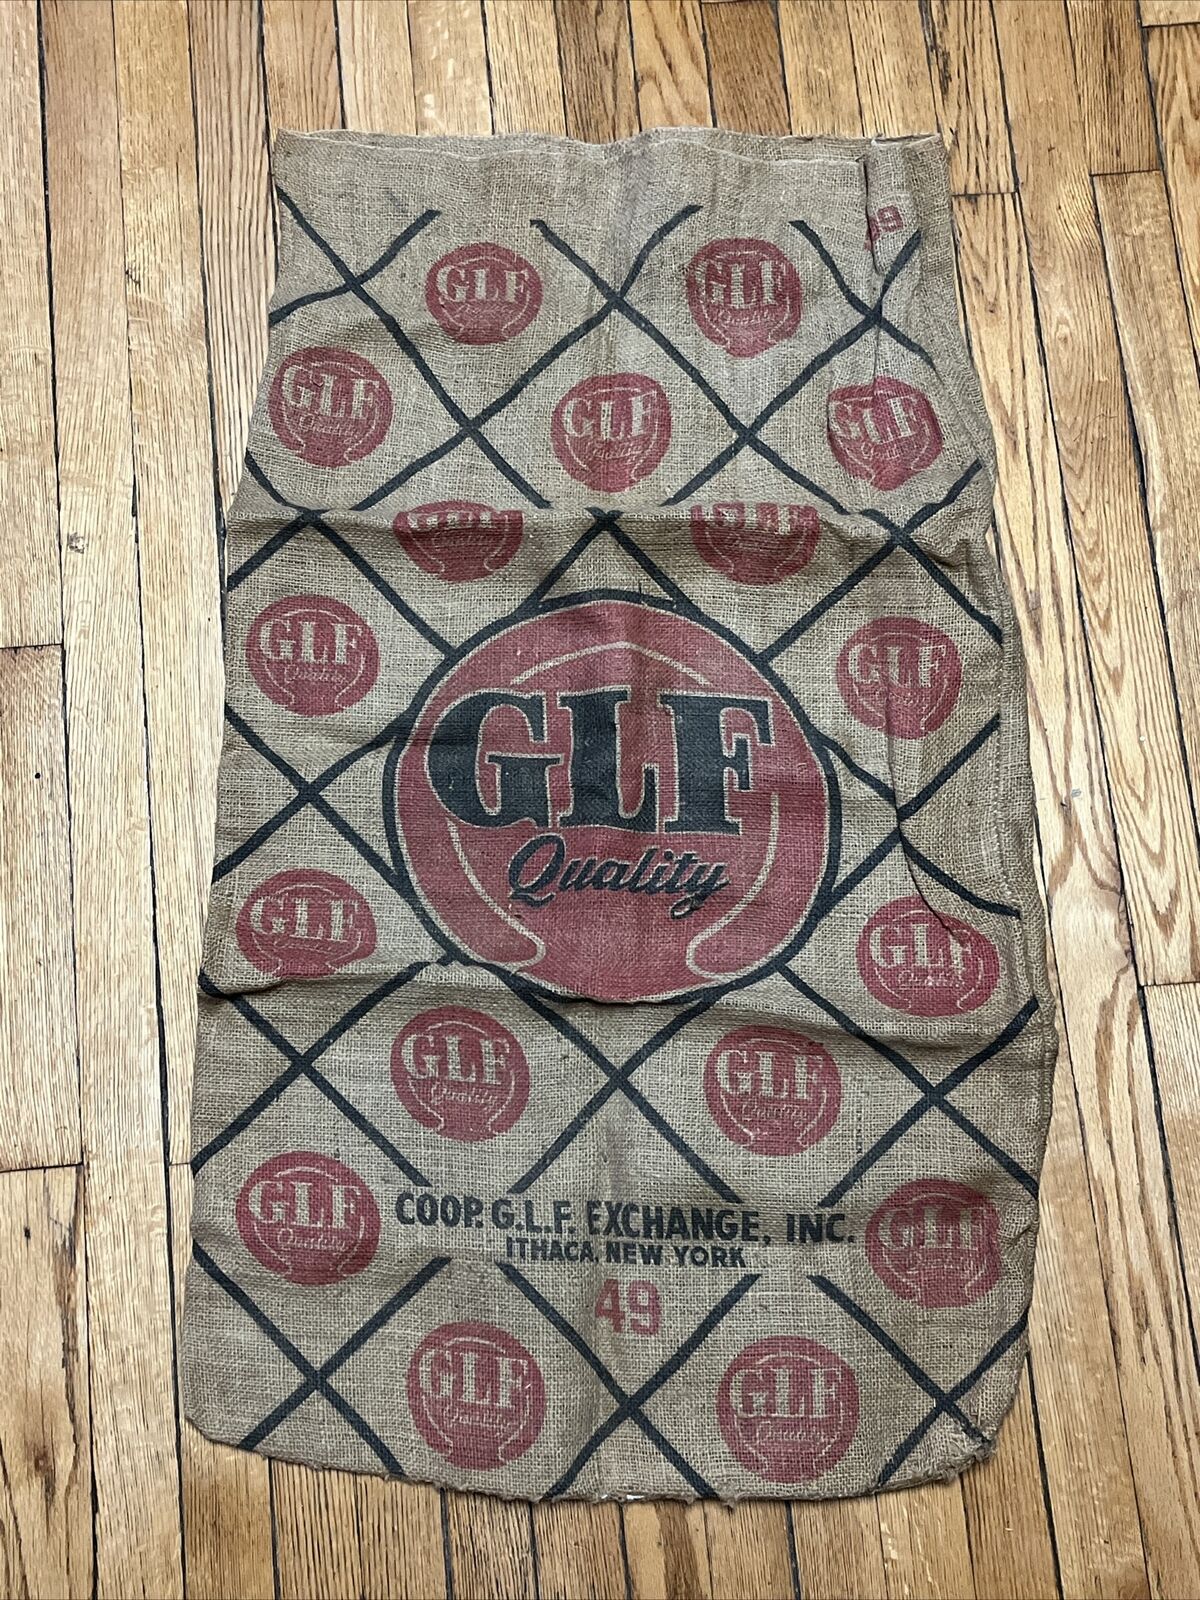 Vintage GLF Burlap Feed Sack  COOP G.L.F. Exchange INC - Ithica, NY 39.5x23”